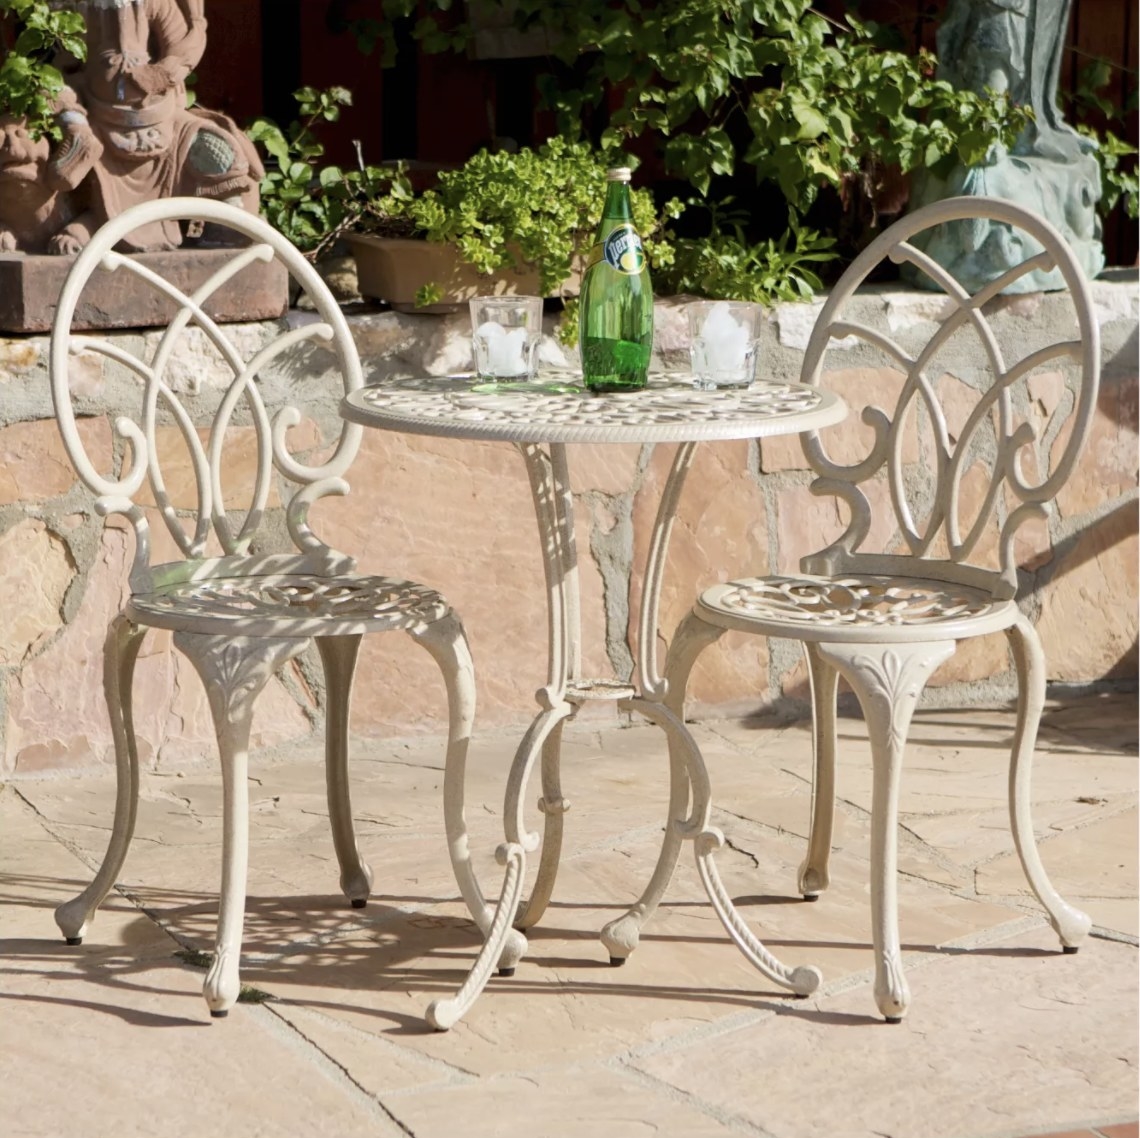 An off-white intricate aluminum table and matching chairs on an outdoor patio